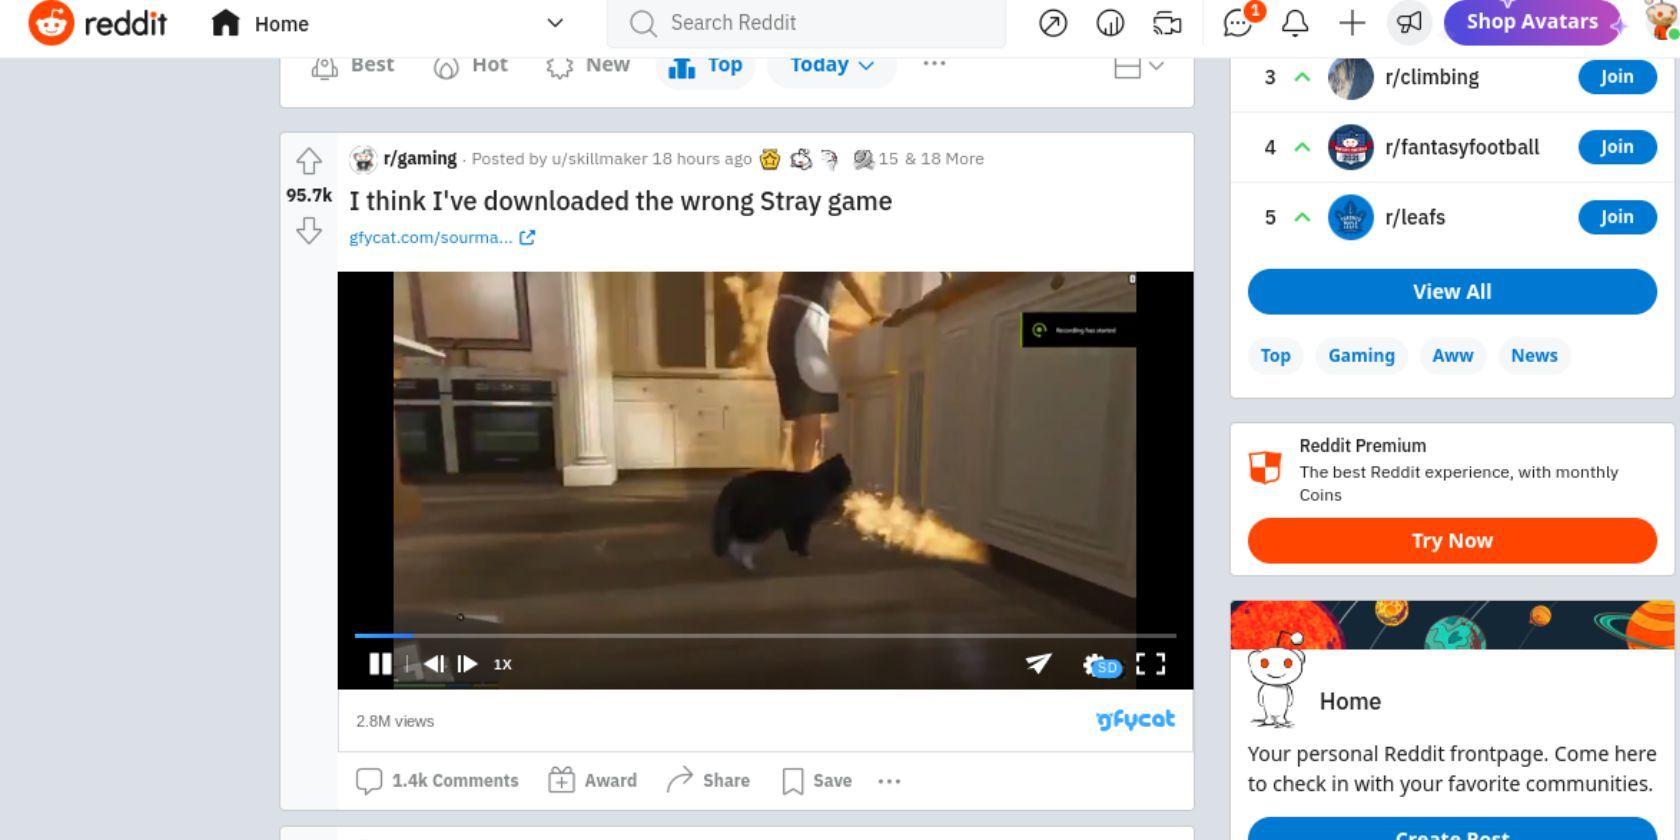 How to Customize Your Reddit Home Feed 5 Tips